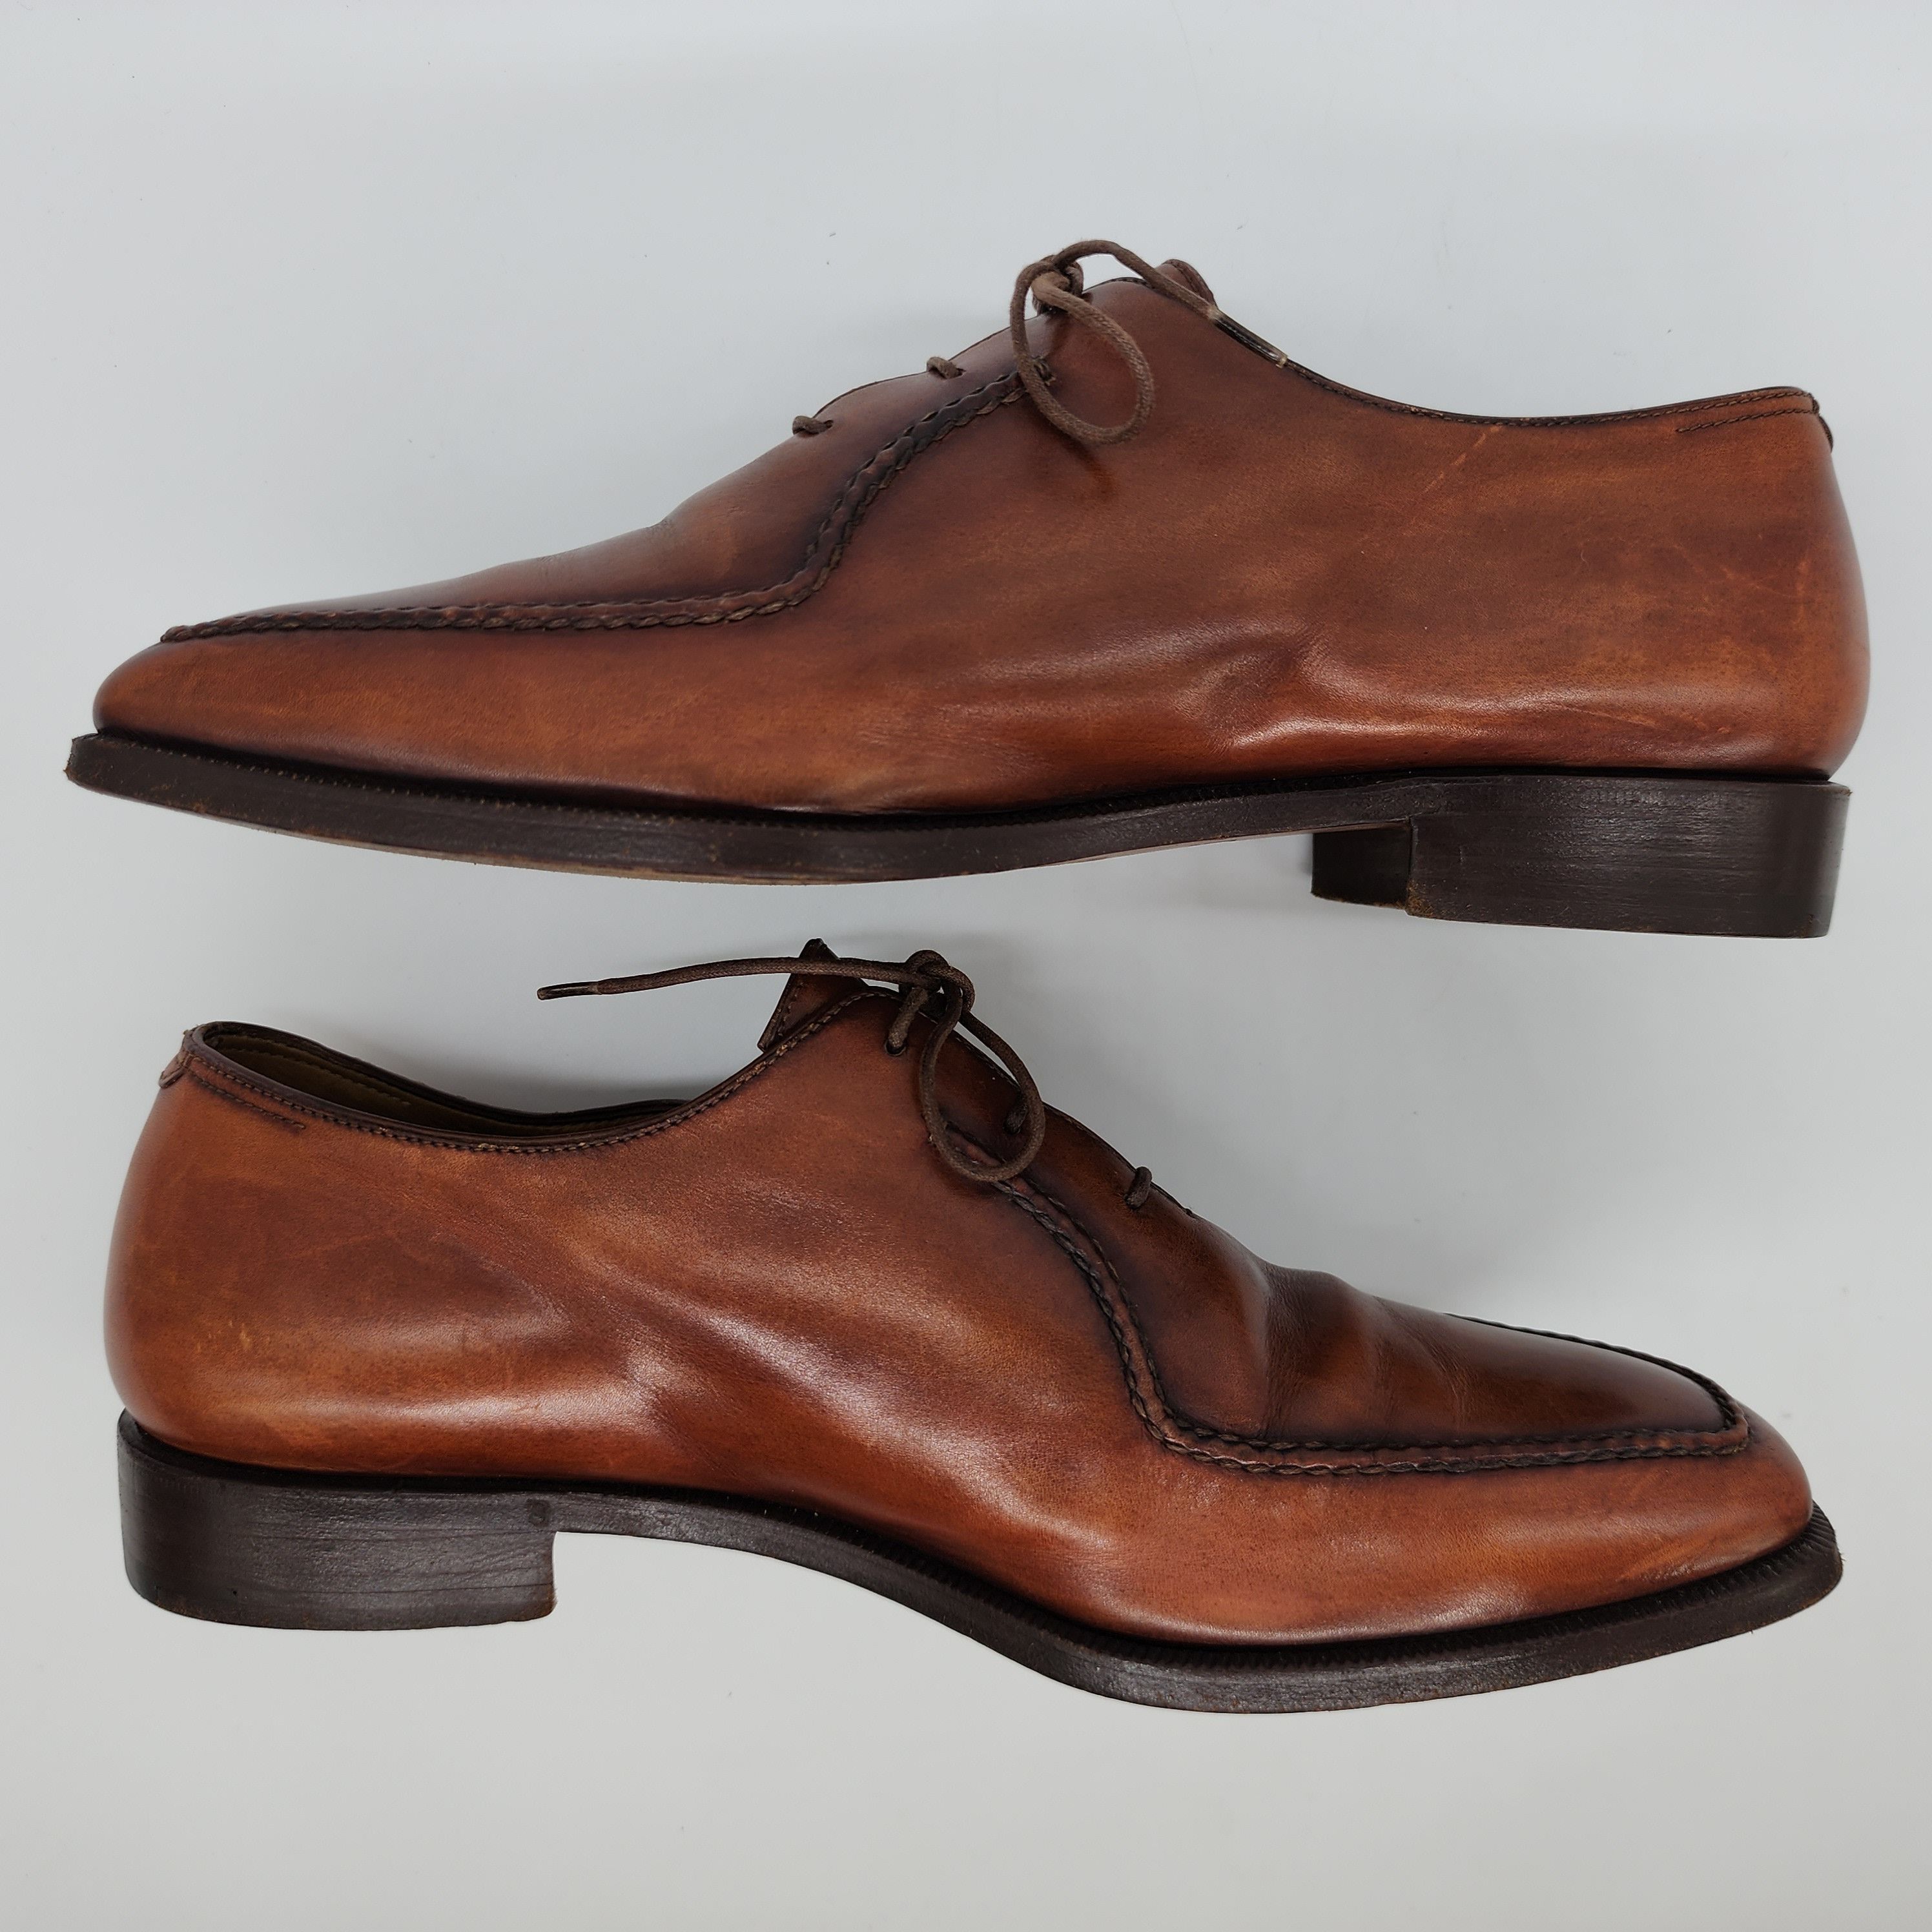 Berluti - Stitched Detail Leather Oxford Shoes - 6